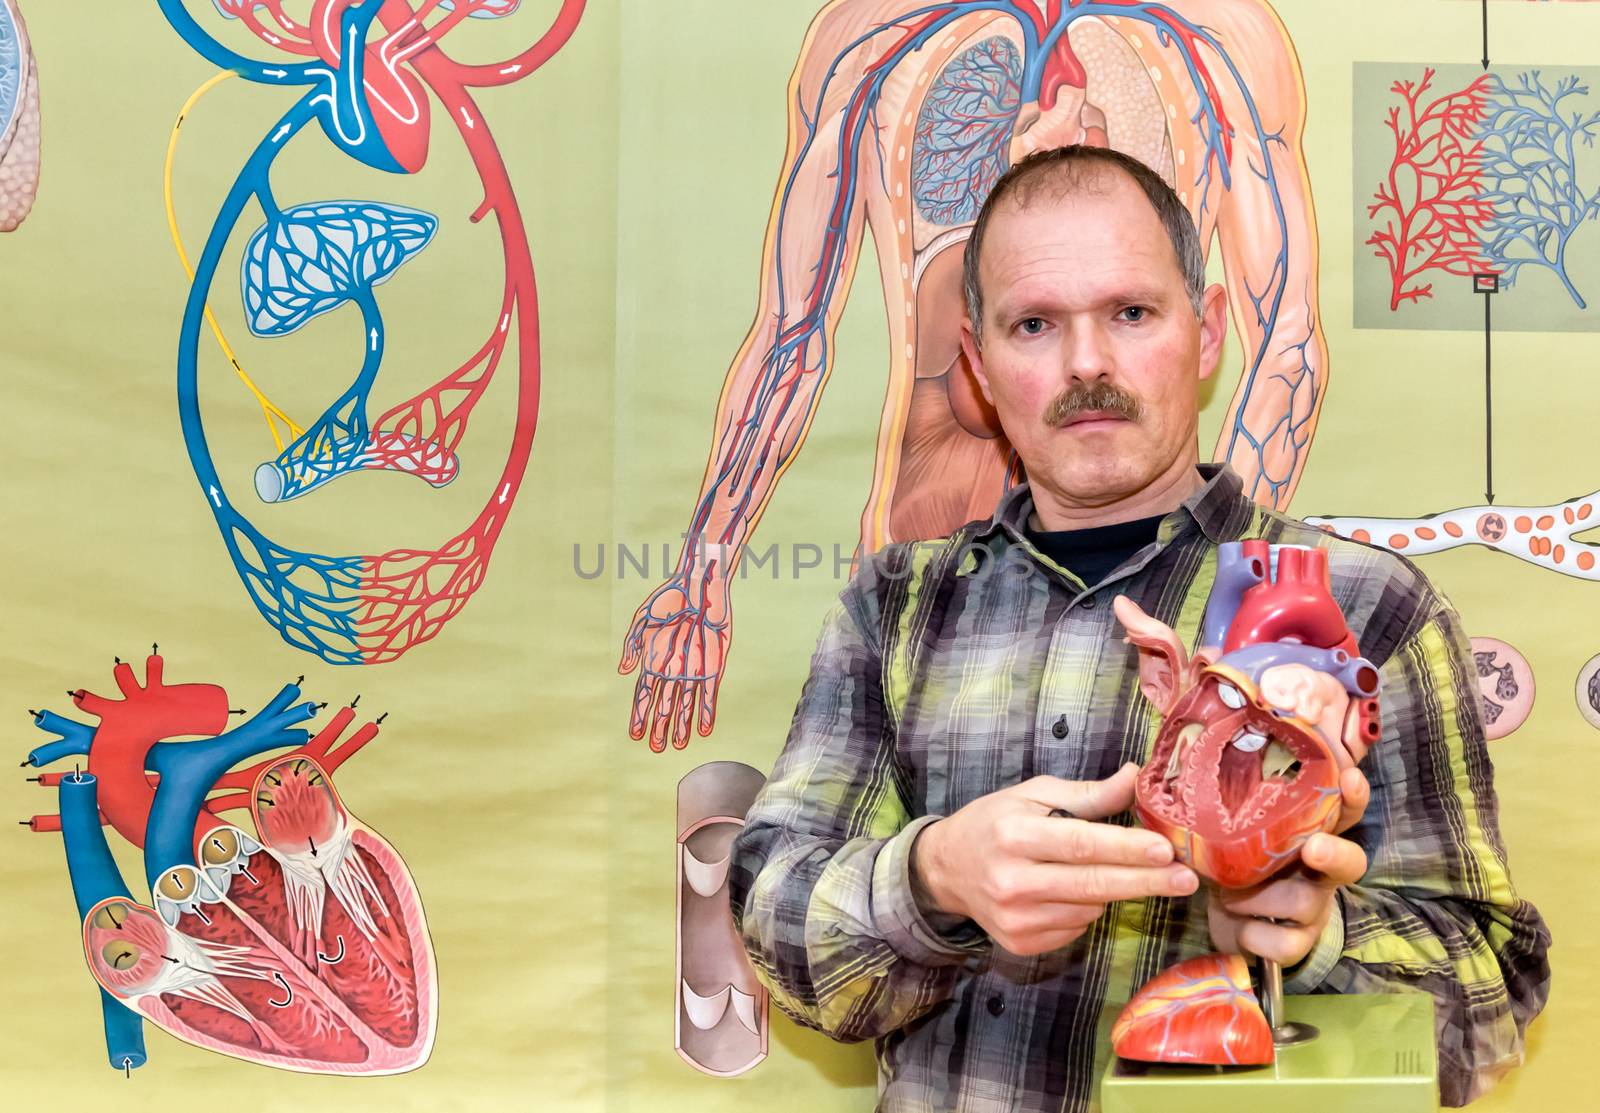 Biology teacher showing human heart model in front of wallchart with blood circulation for education